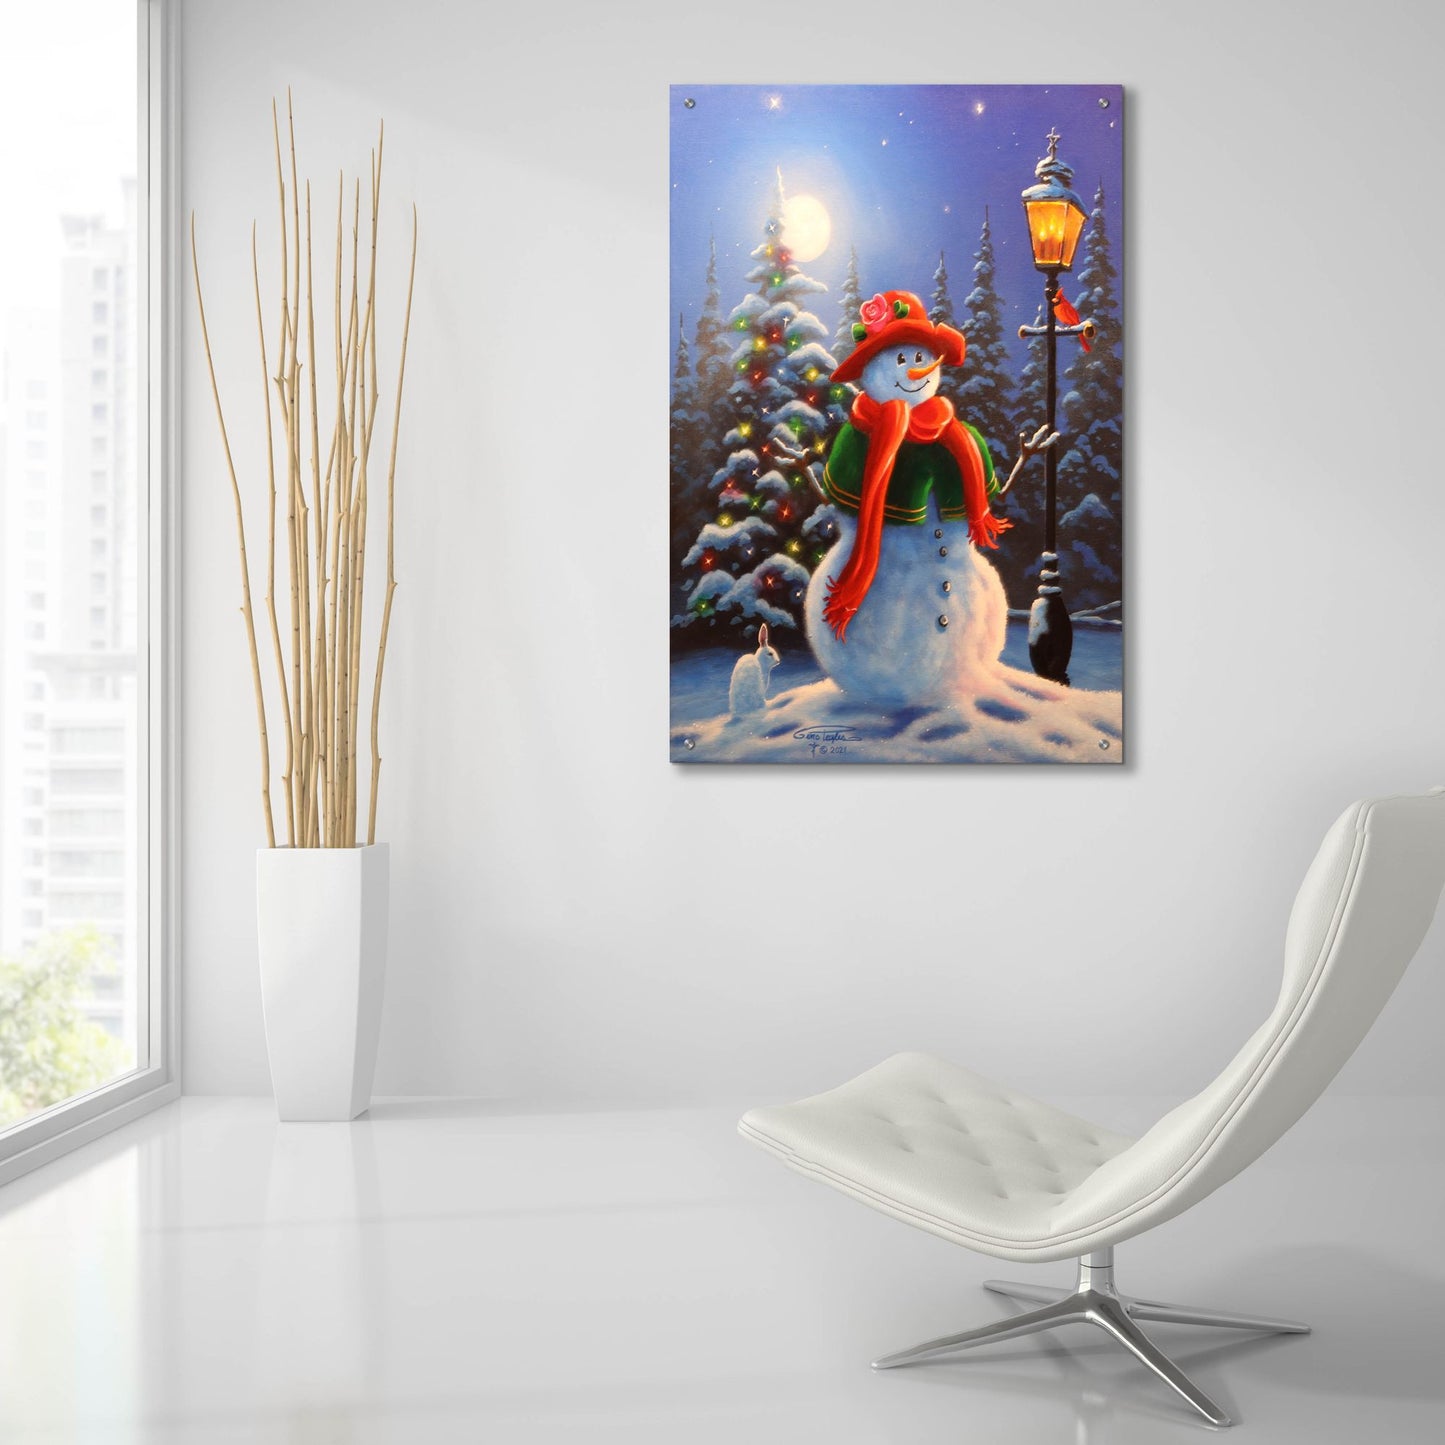 Epic Art 'Christmas With Friends' by Geno Peoples, Acrylic Glass Wall Art,24x36